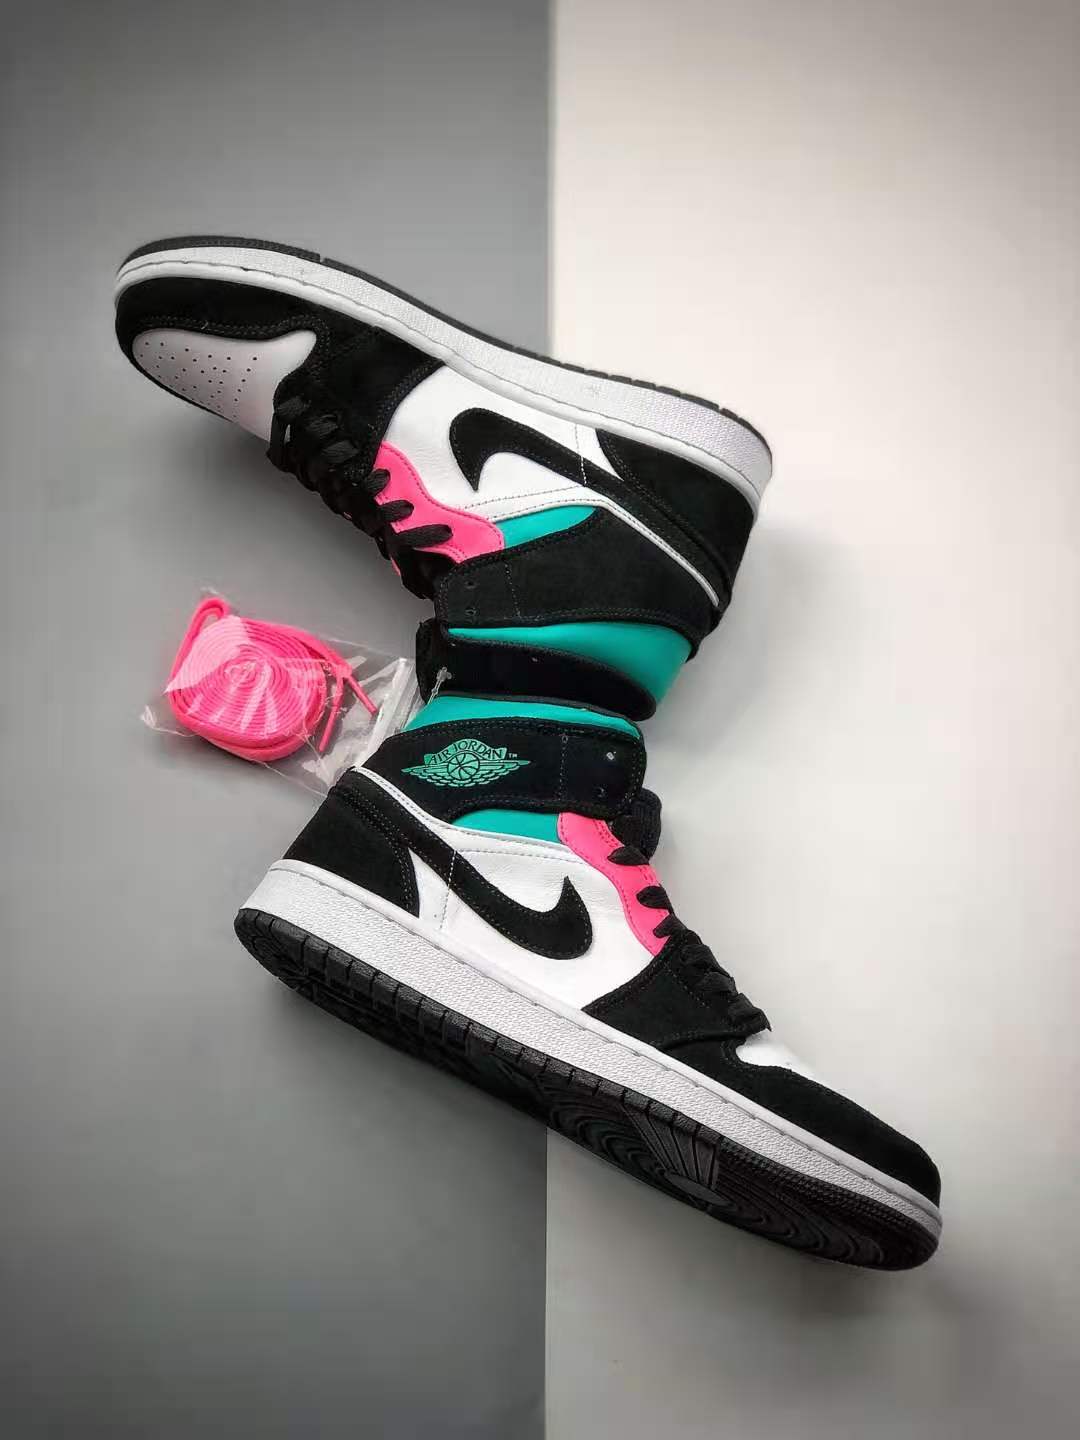 Air Jordan 1 Mid SE 'South Beach' 852542-116 - Exclusive Sneakers at Great Prices!